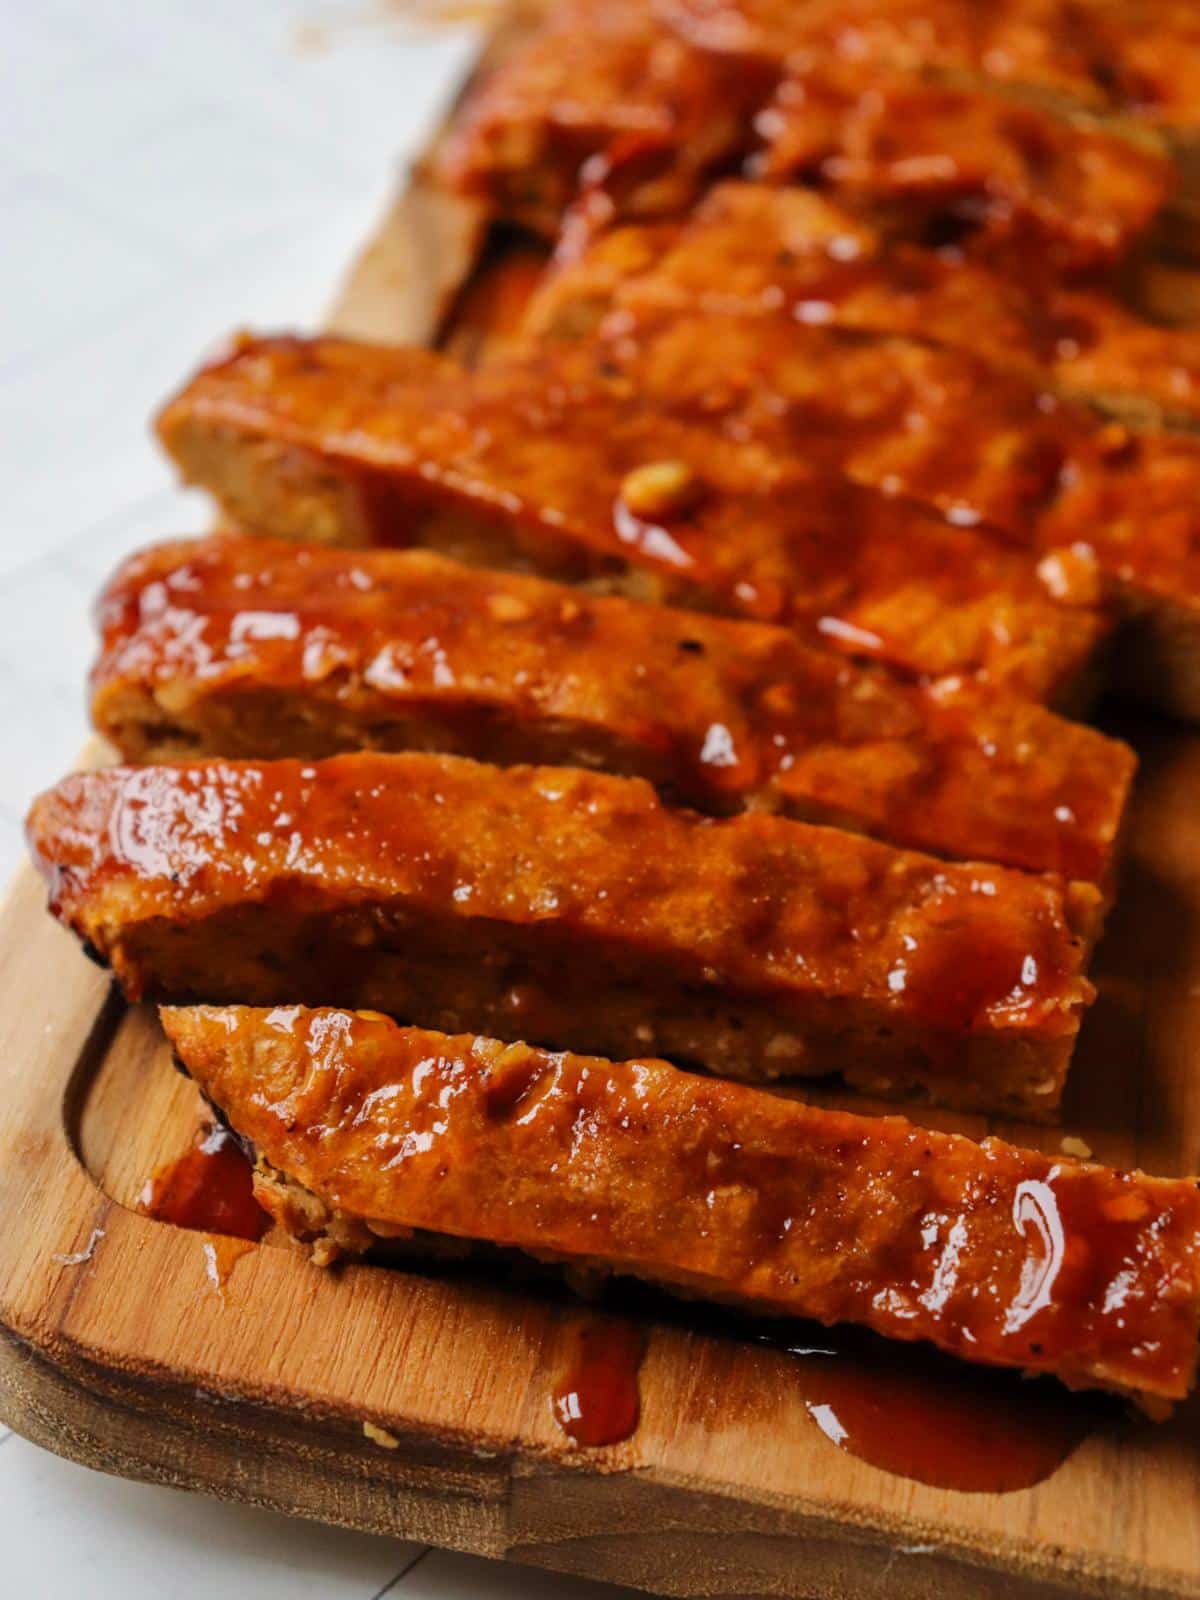 Vegan ribs laid out on a wooden cutting board topped with bbq sauce.